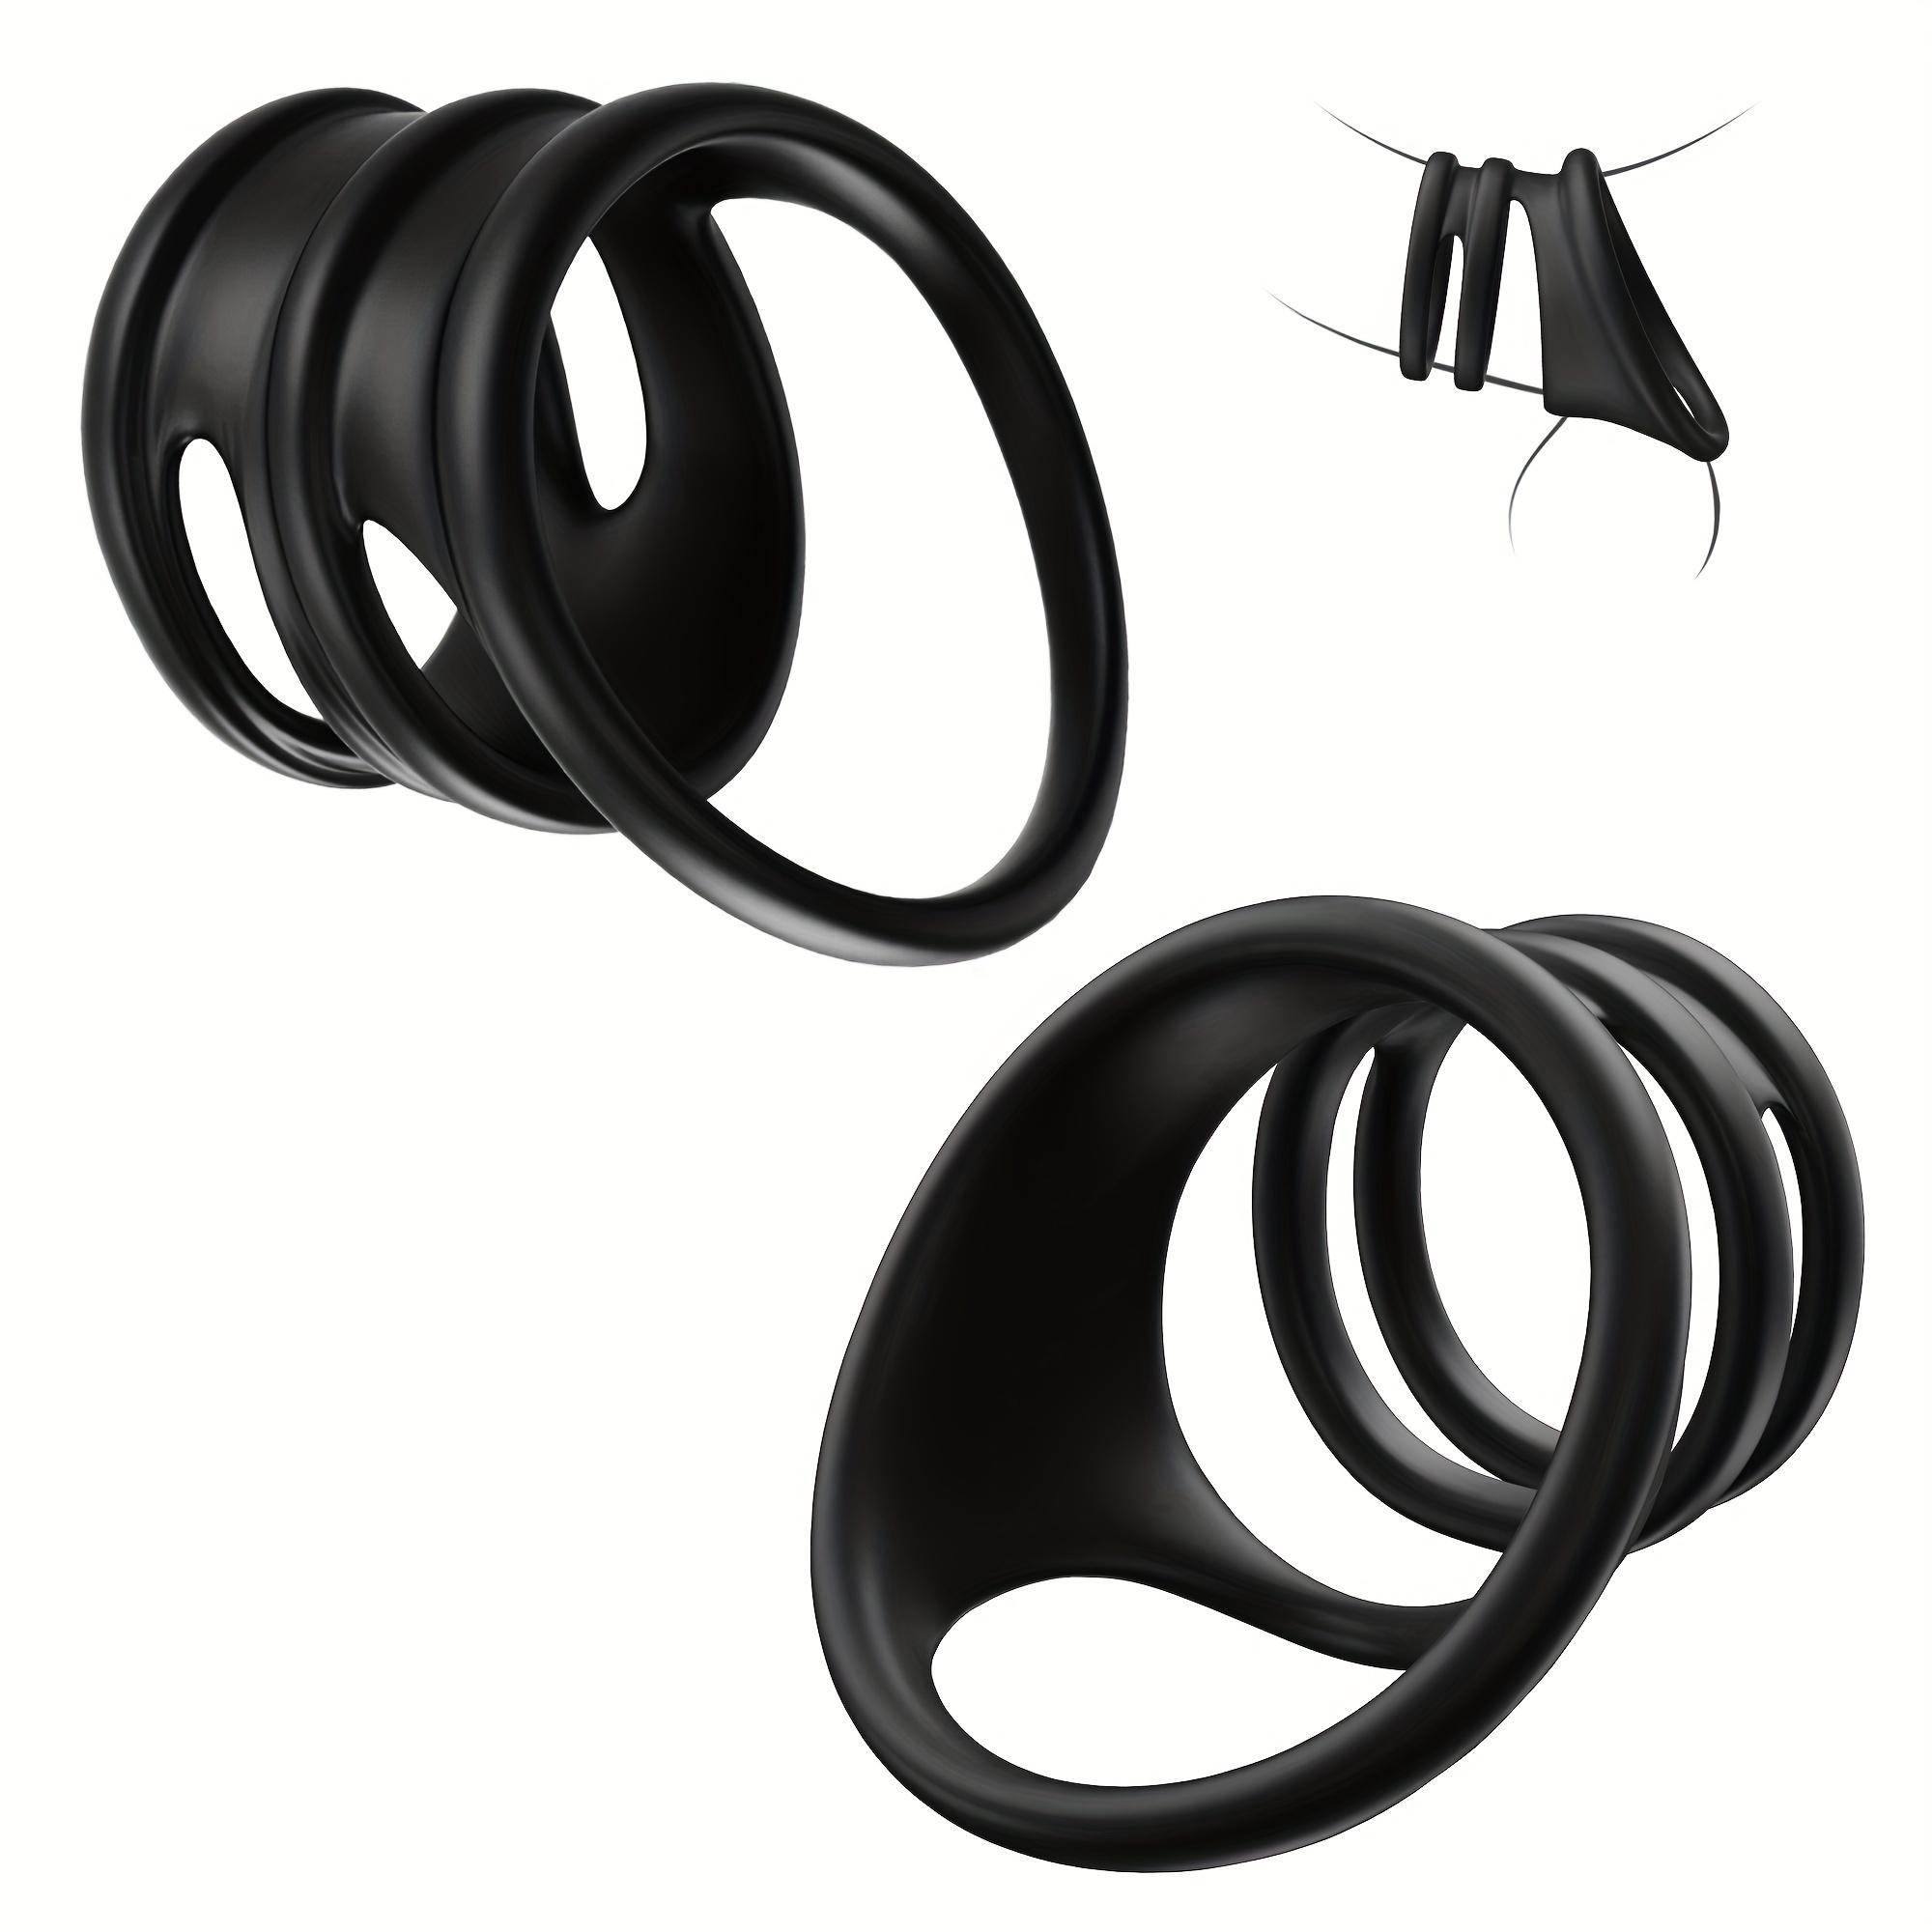  Wholesale Silicone Reusable Delay Ejaculation Stronger Sex Toys Cock Ring Penis Sleeve For Penis Delay Loop Cock